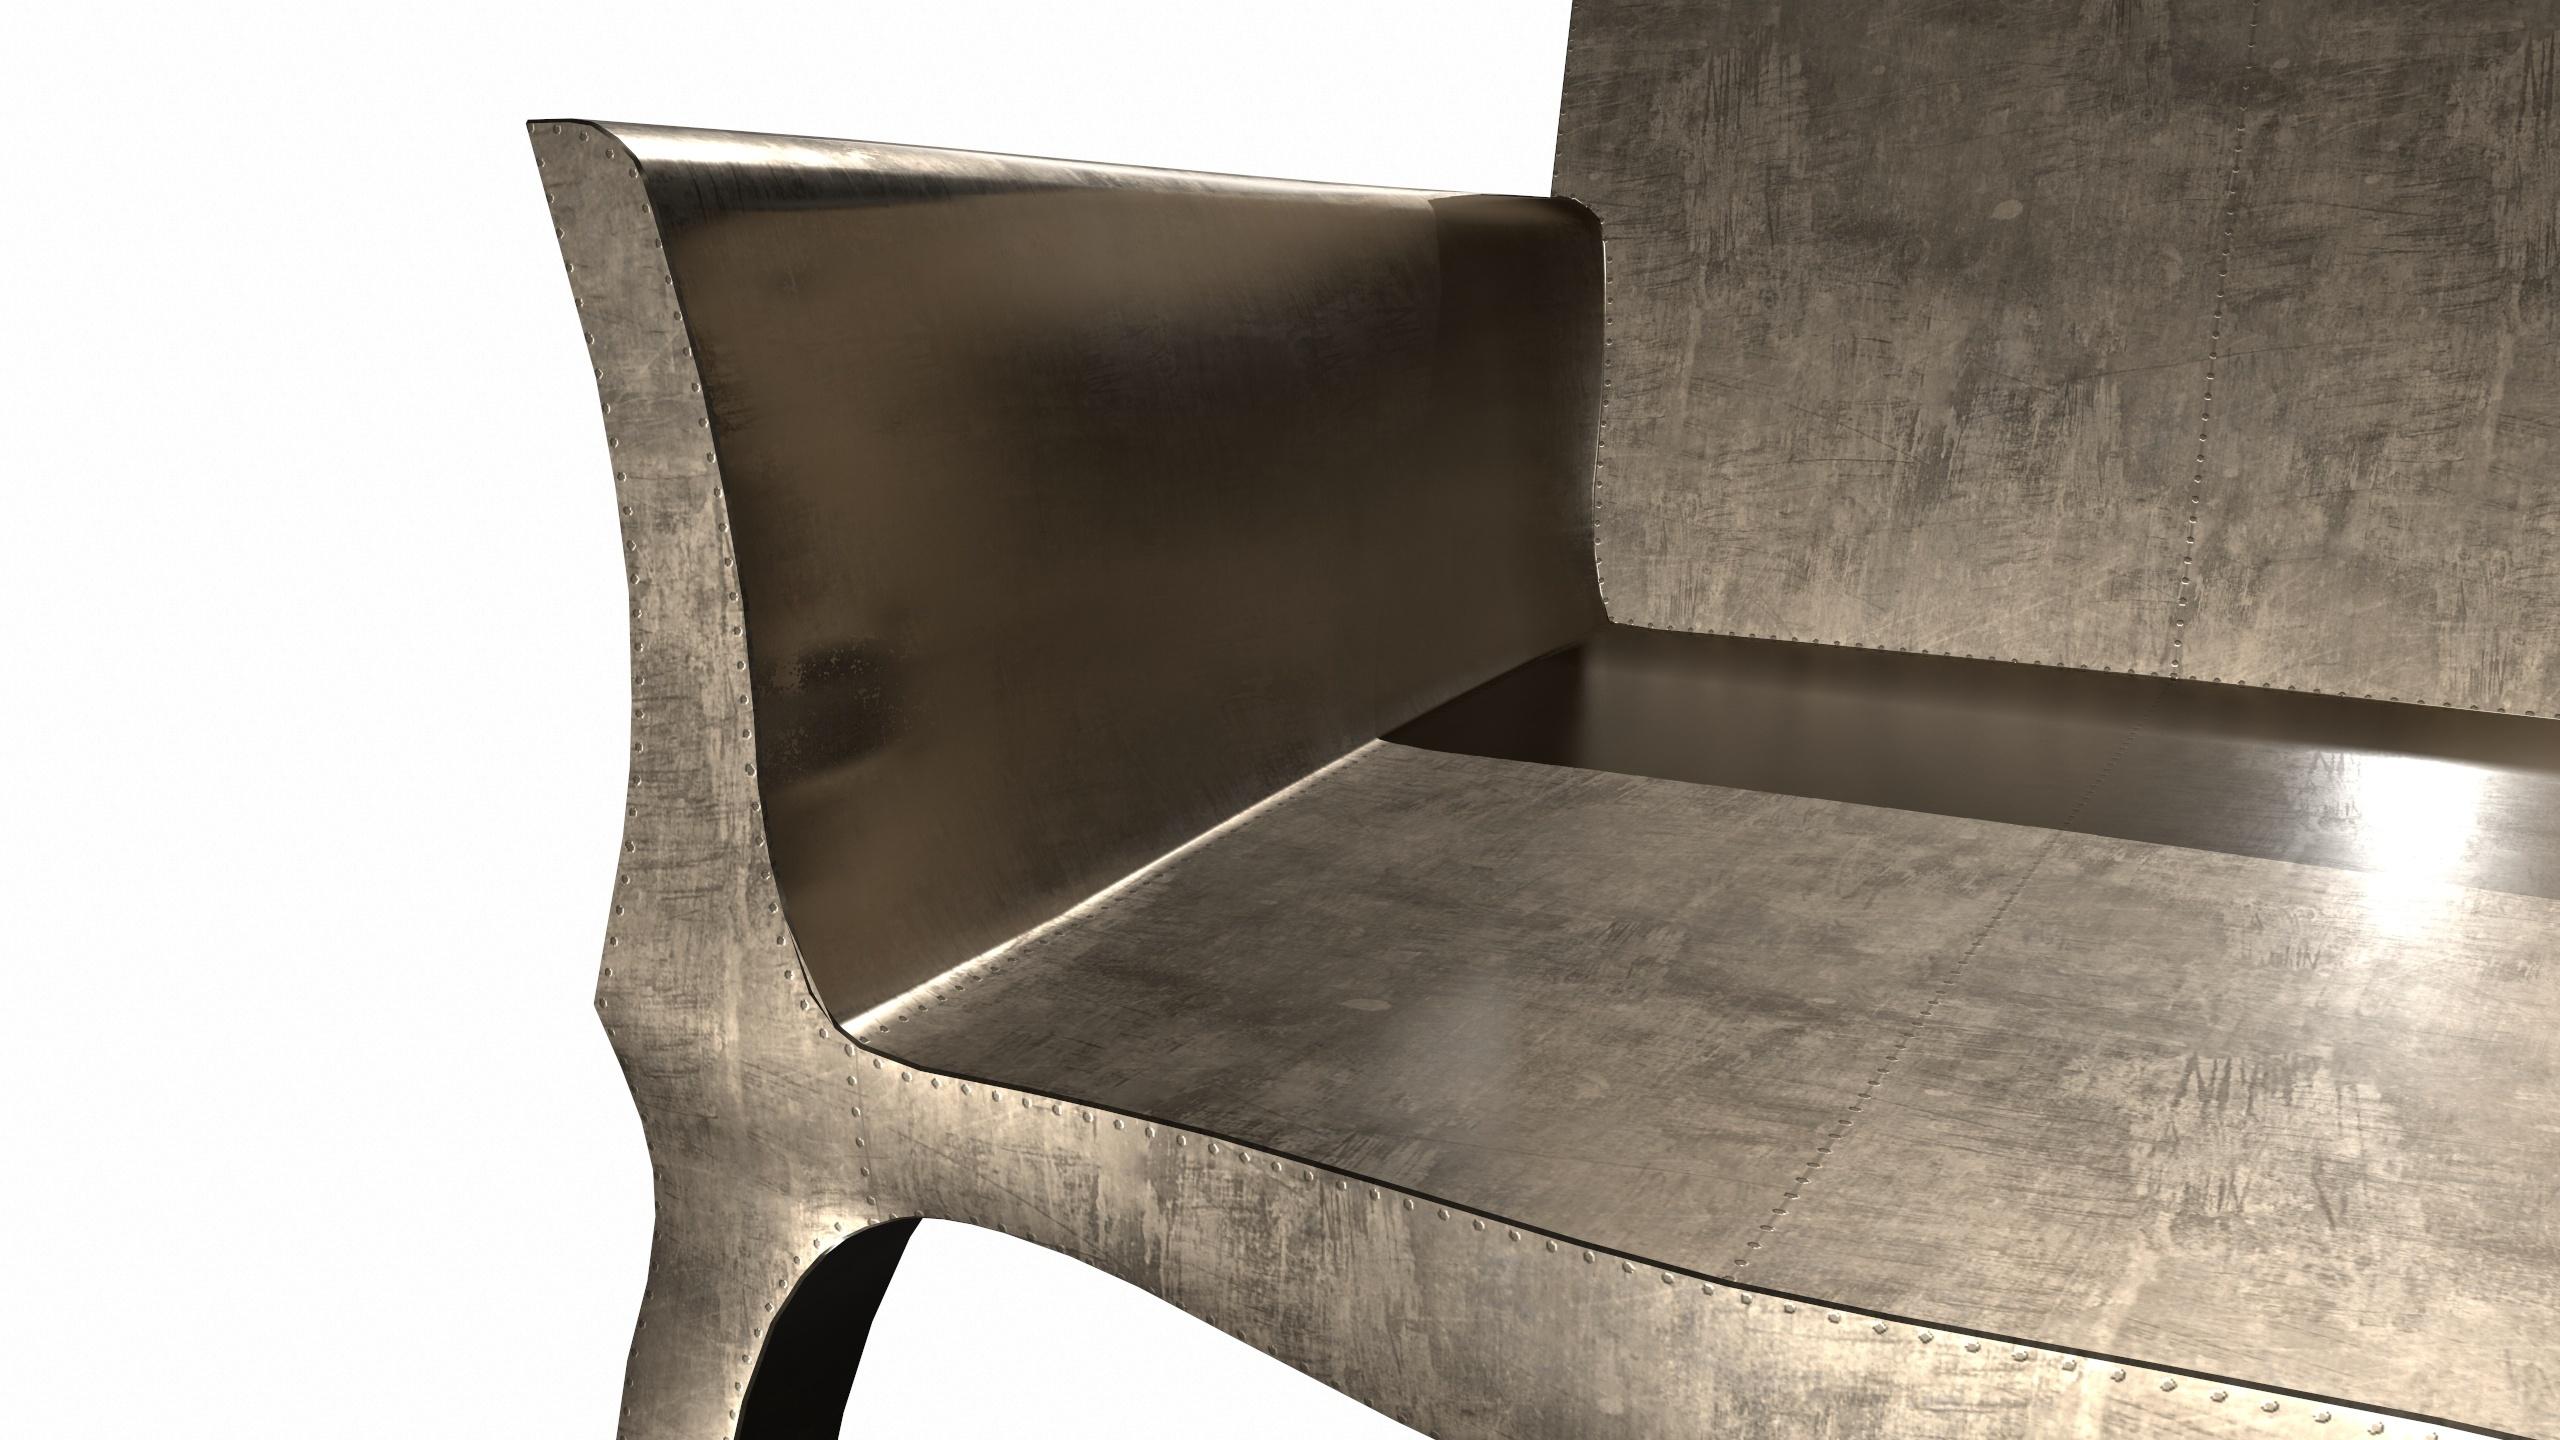 Sheet Metal Art Deco Desk Chair in Smooth Antique Bronze by Paul Mathieu for S. Odegard For Sale